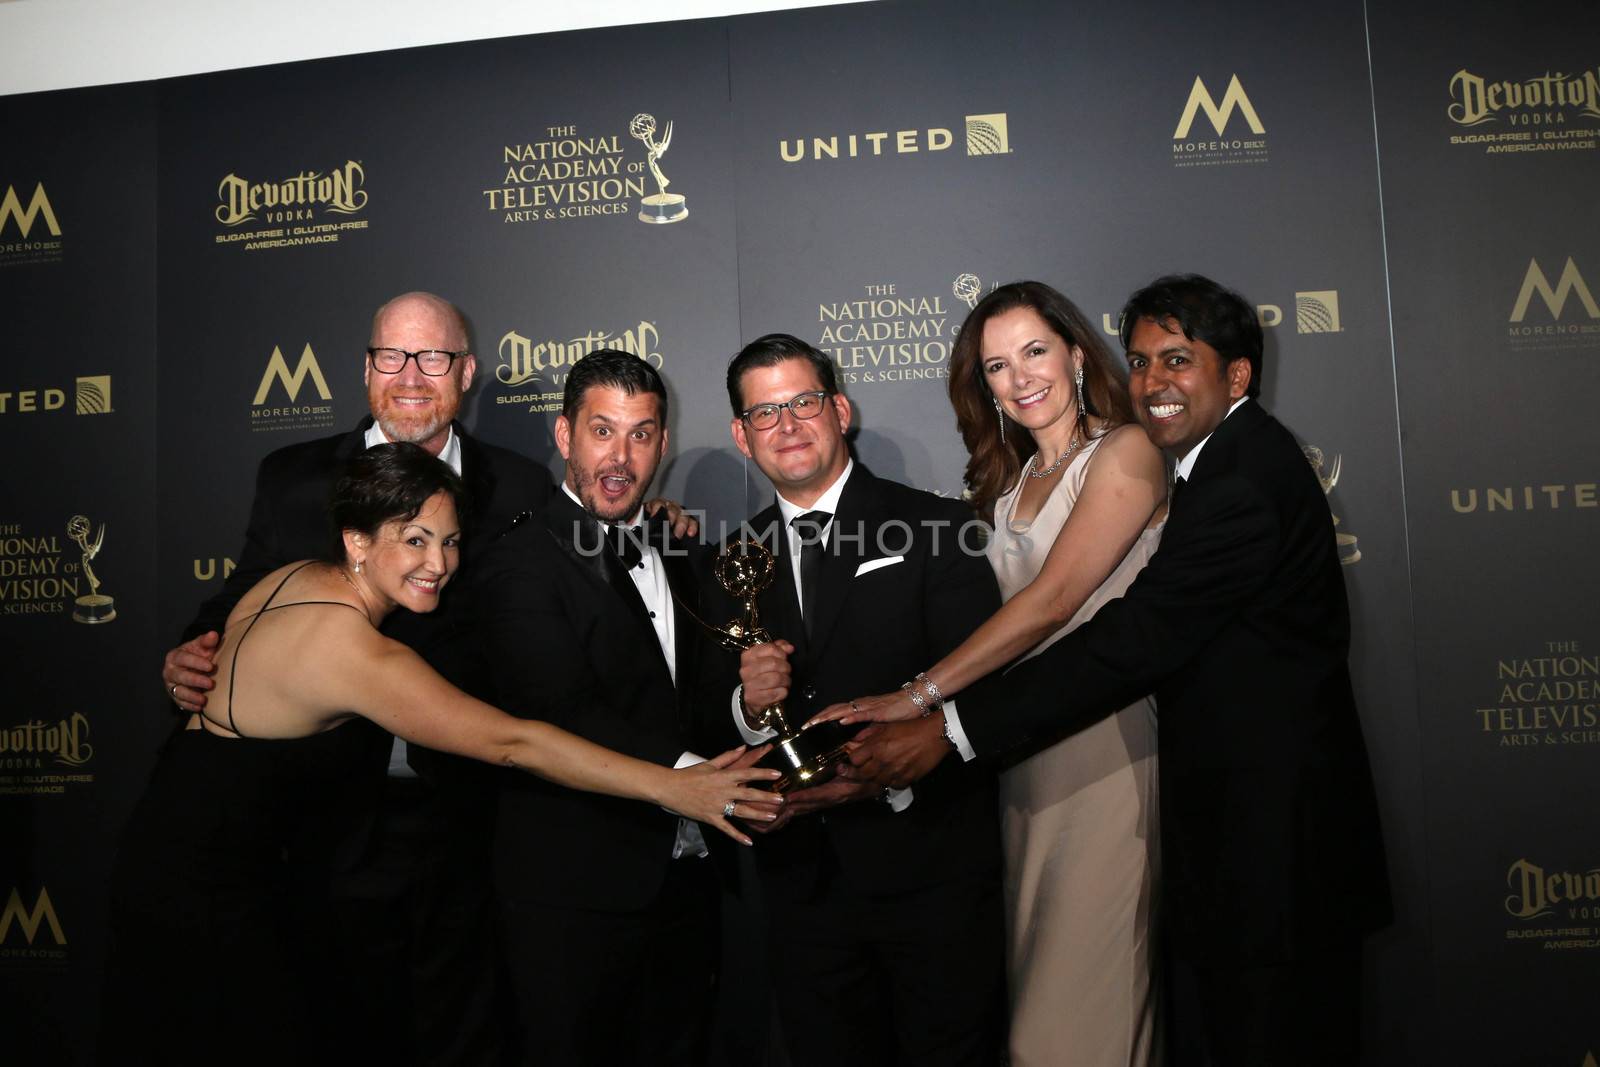 Outstanding Drama Series Writing Team, The Young and The Restless
at the 44th Daytime Emmy Awards - Press Room, Pasadena Civic Auditorium, Pasadena, CA 04-30-17